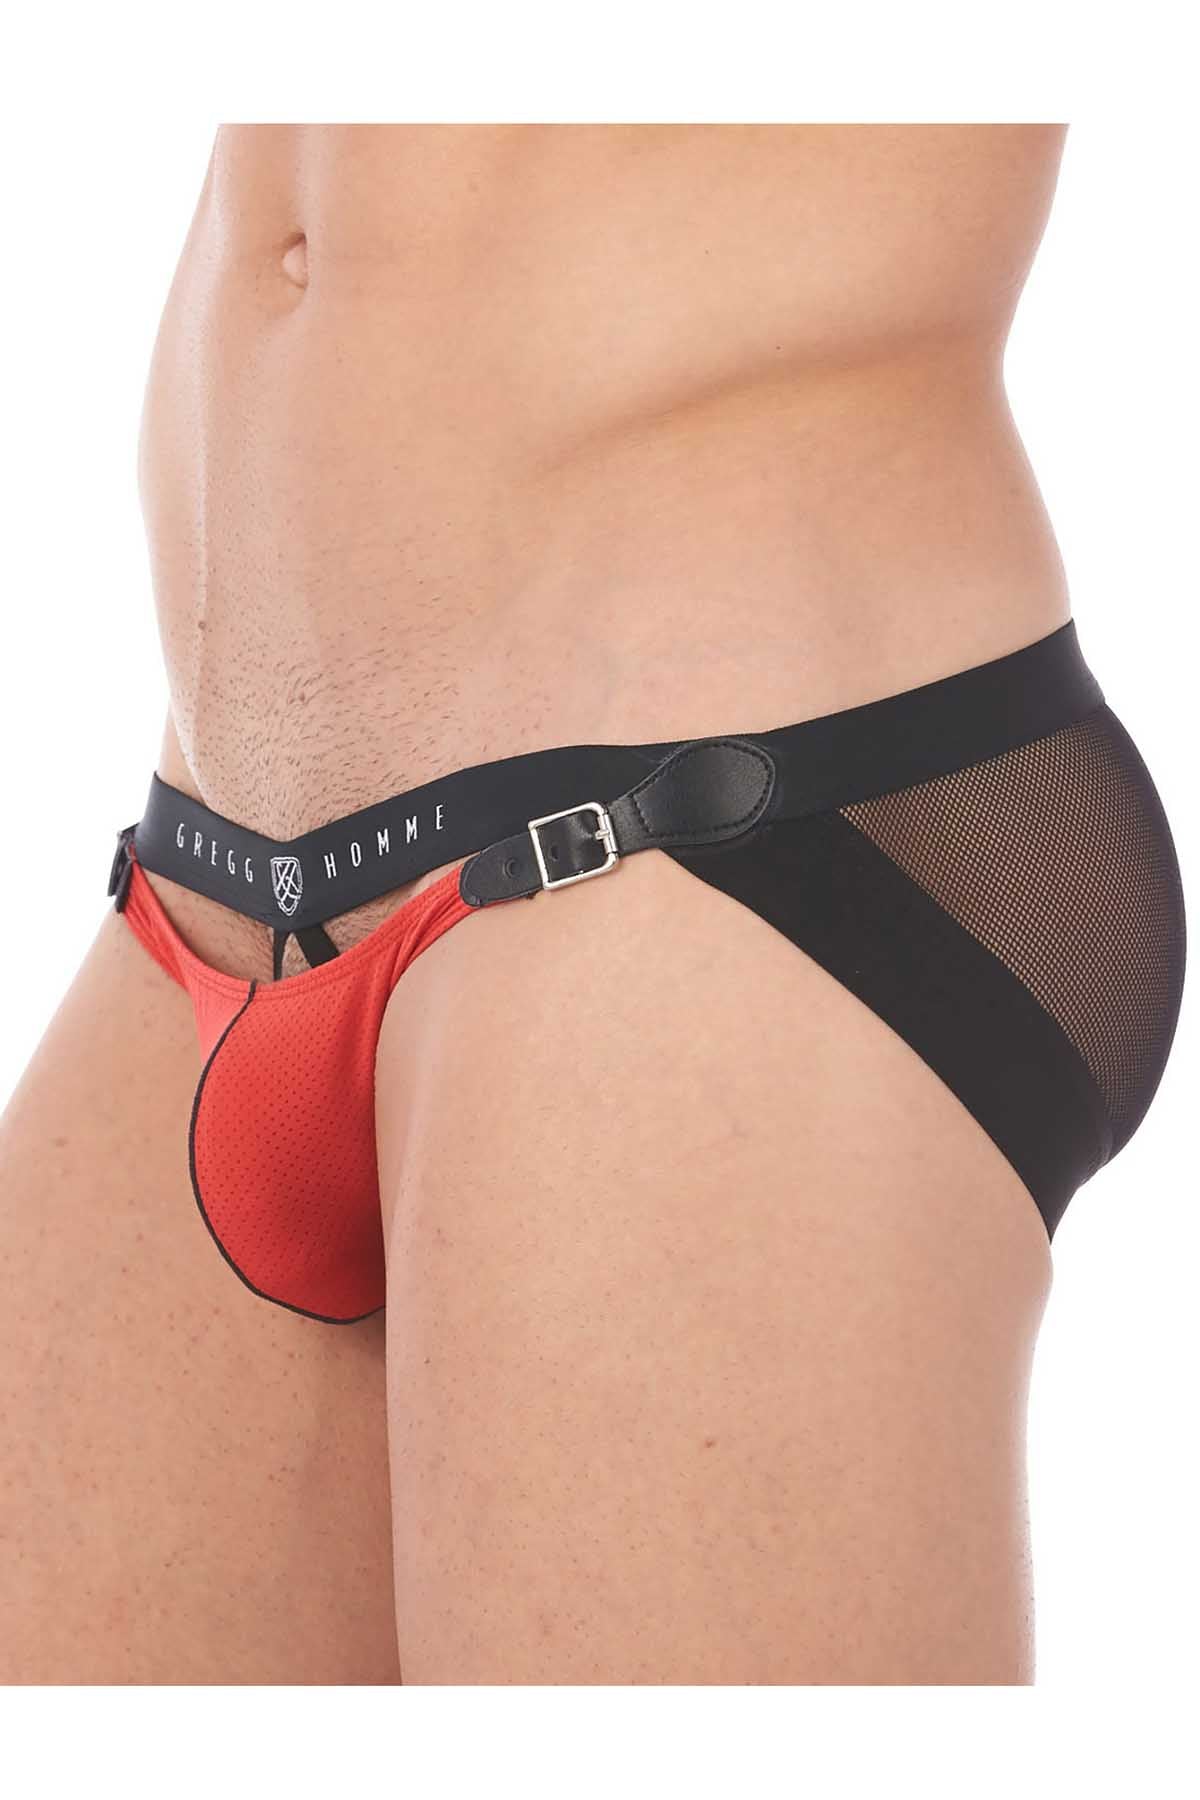 Gregg Homme Red Chaser C-Ring Detachable Pouch Brief